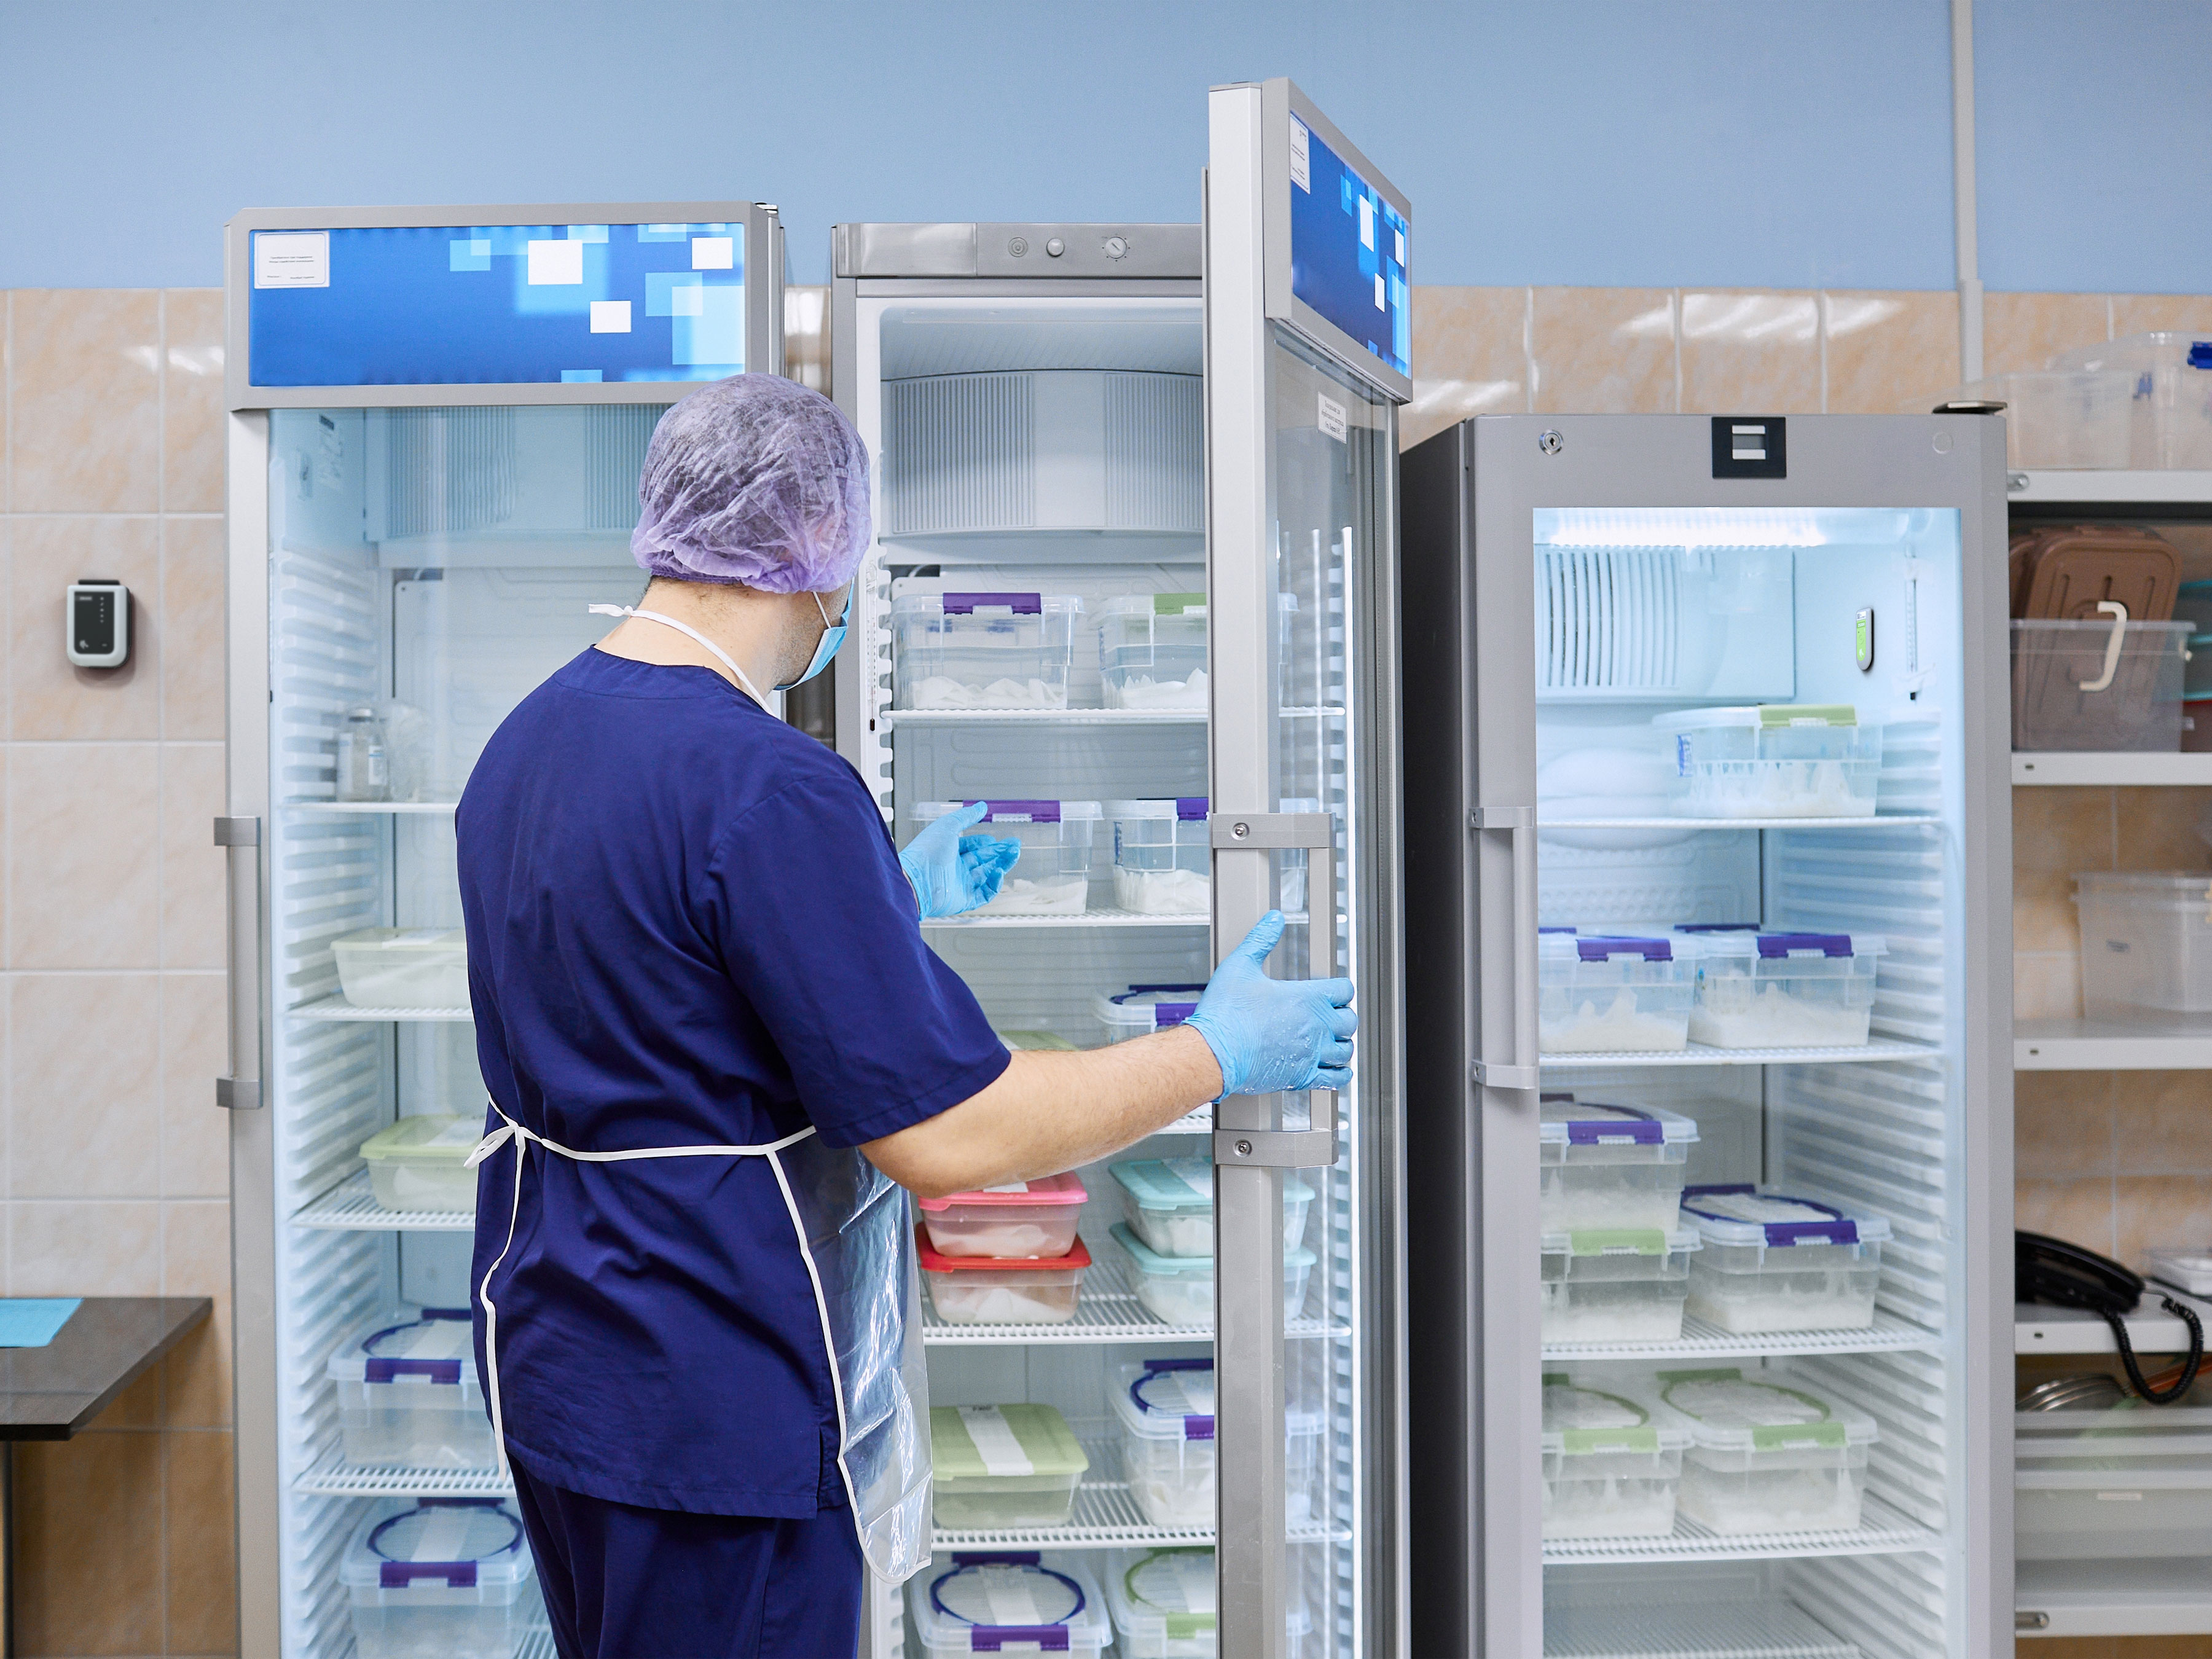 Zebra's environmental sensors are being used in industrial fridges within a healthcare setting, highlighting their advanced technology for accurate temperature monitoring and tracking of environmental conditions for confidence in regulatory compliance and quality control.